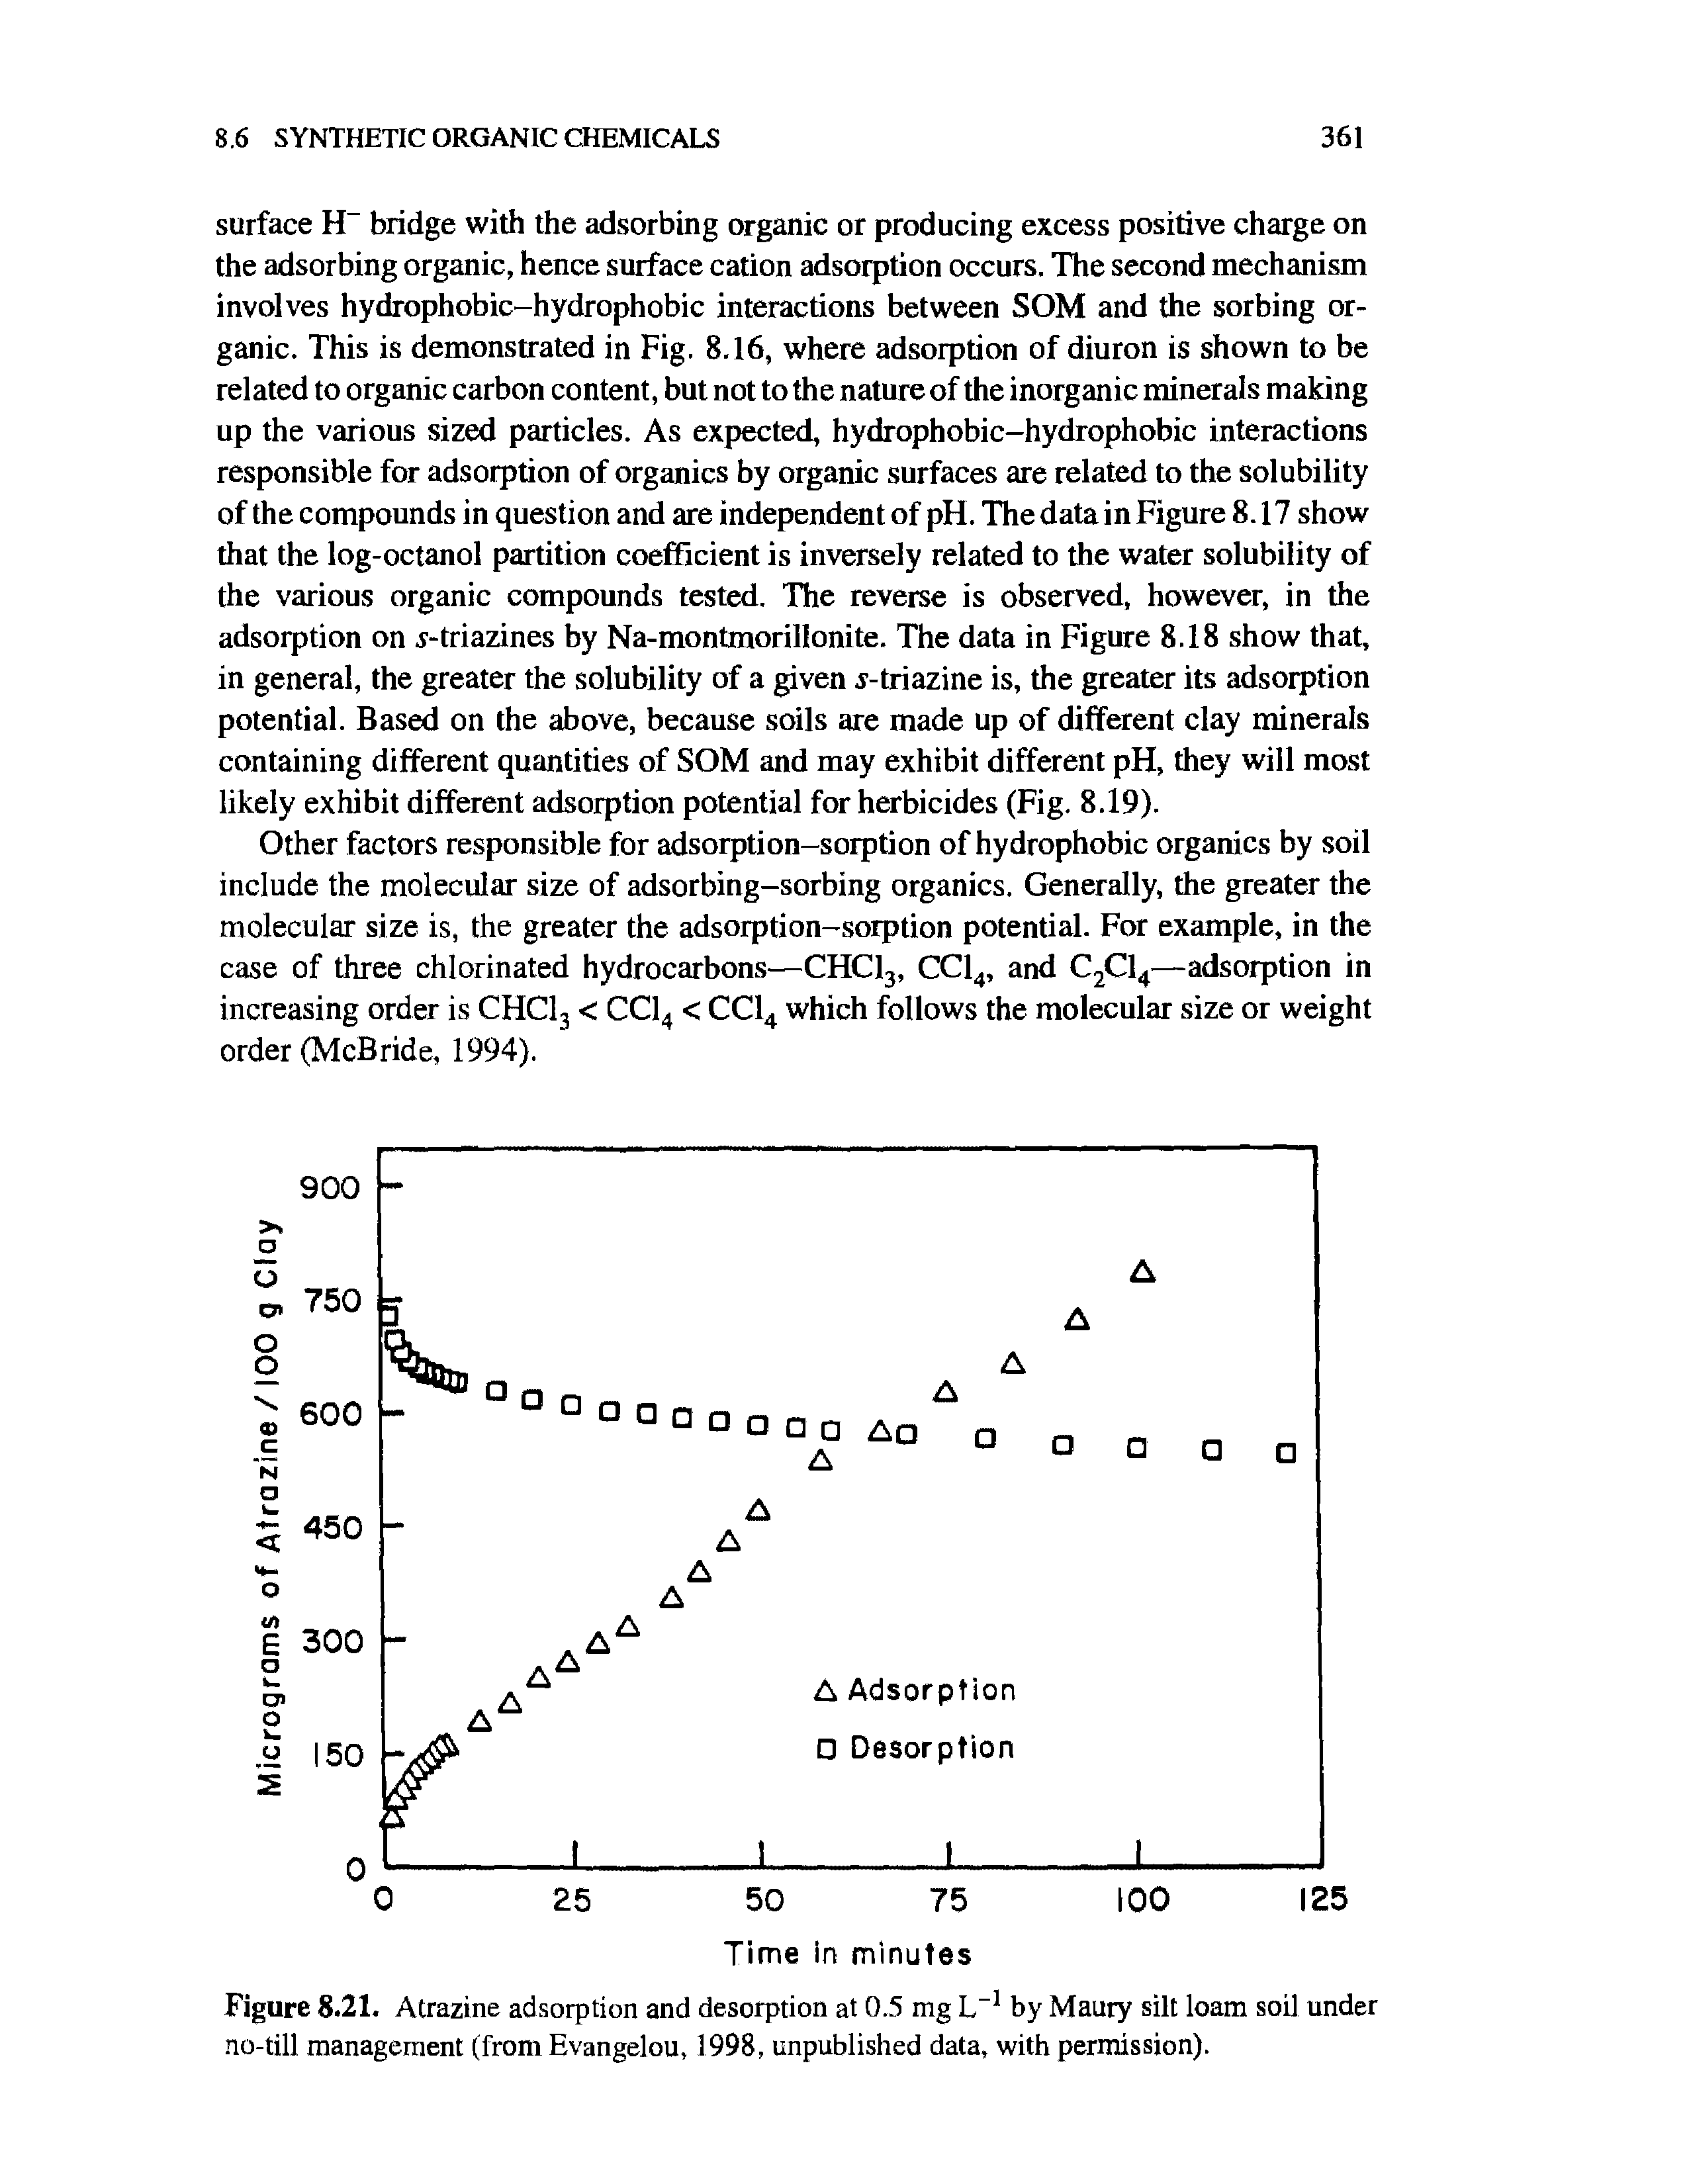 Figure 8.21. Atrazine adsorption and desorption at 0.5 mg L-1 by Maury silt loam soil under no-till management (from Evangelou, 1998, unpublished data, with permission).